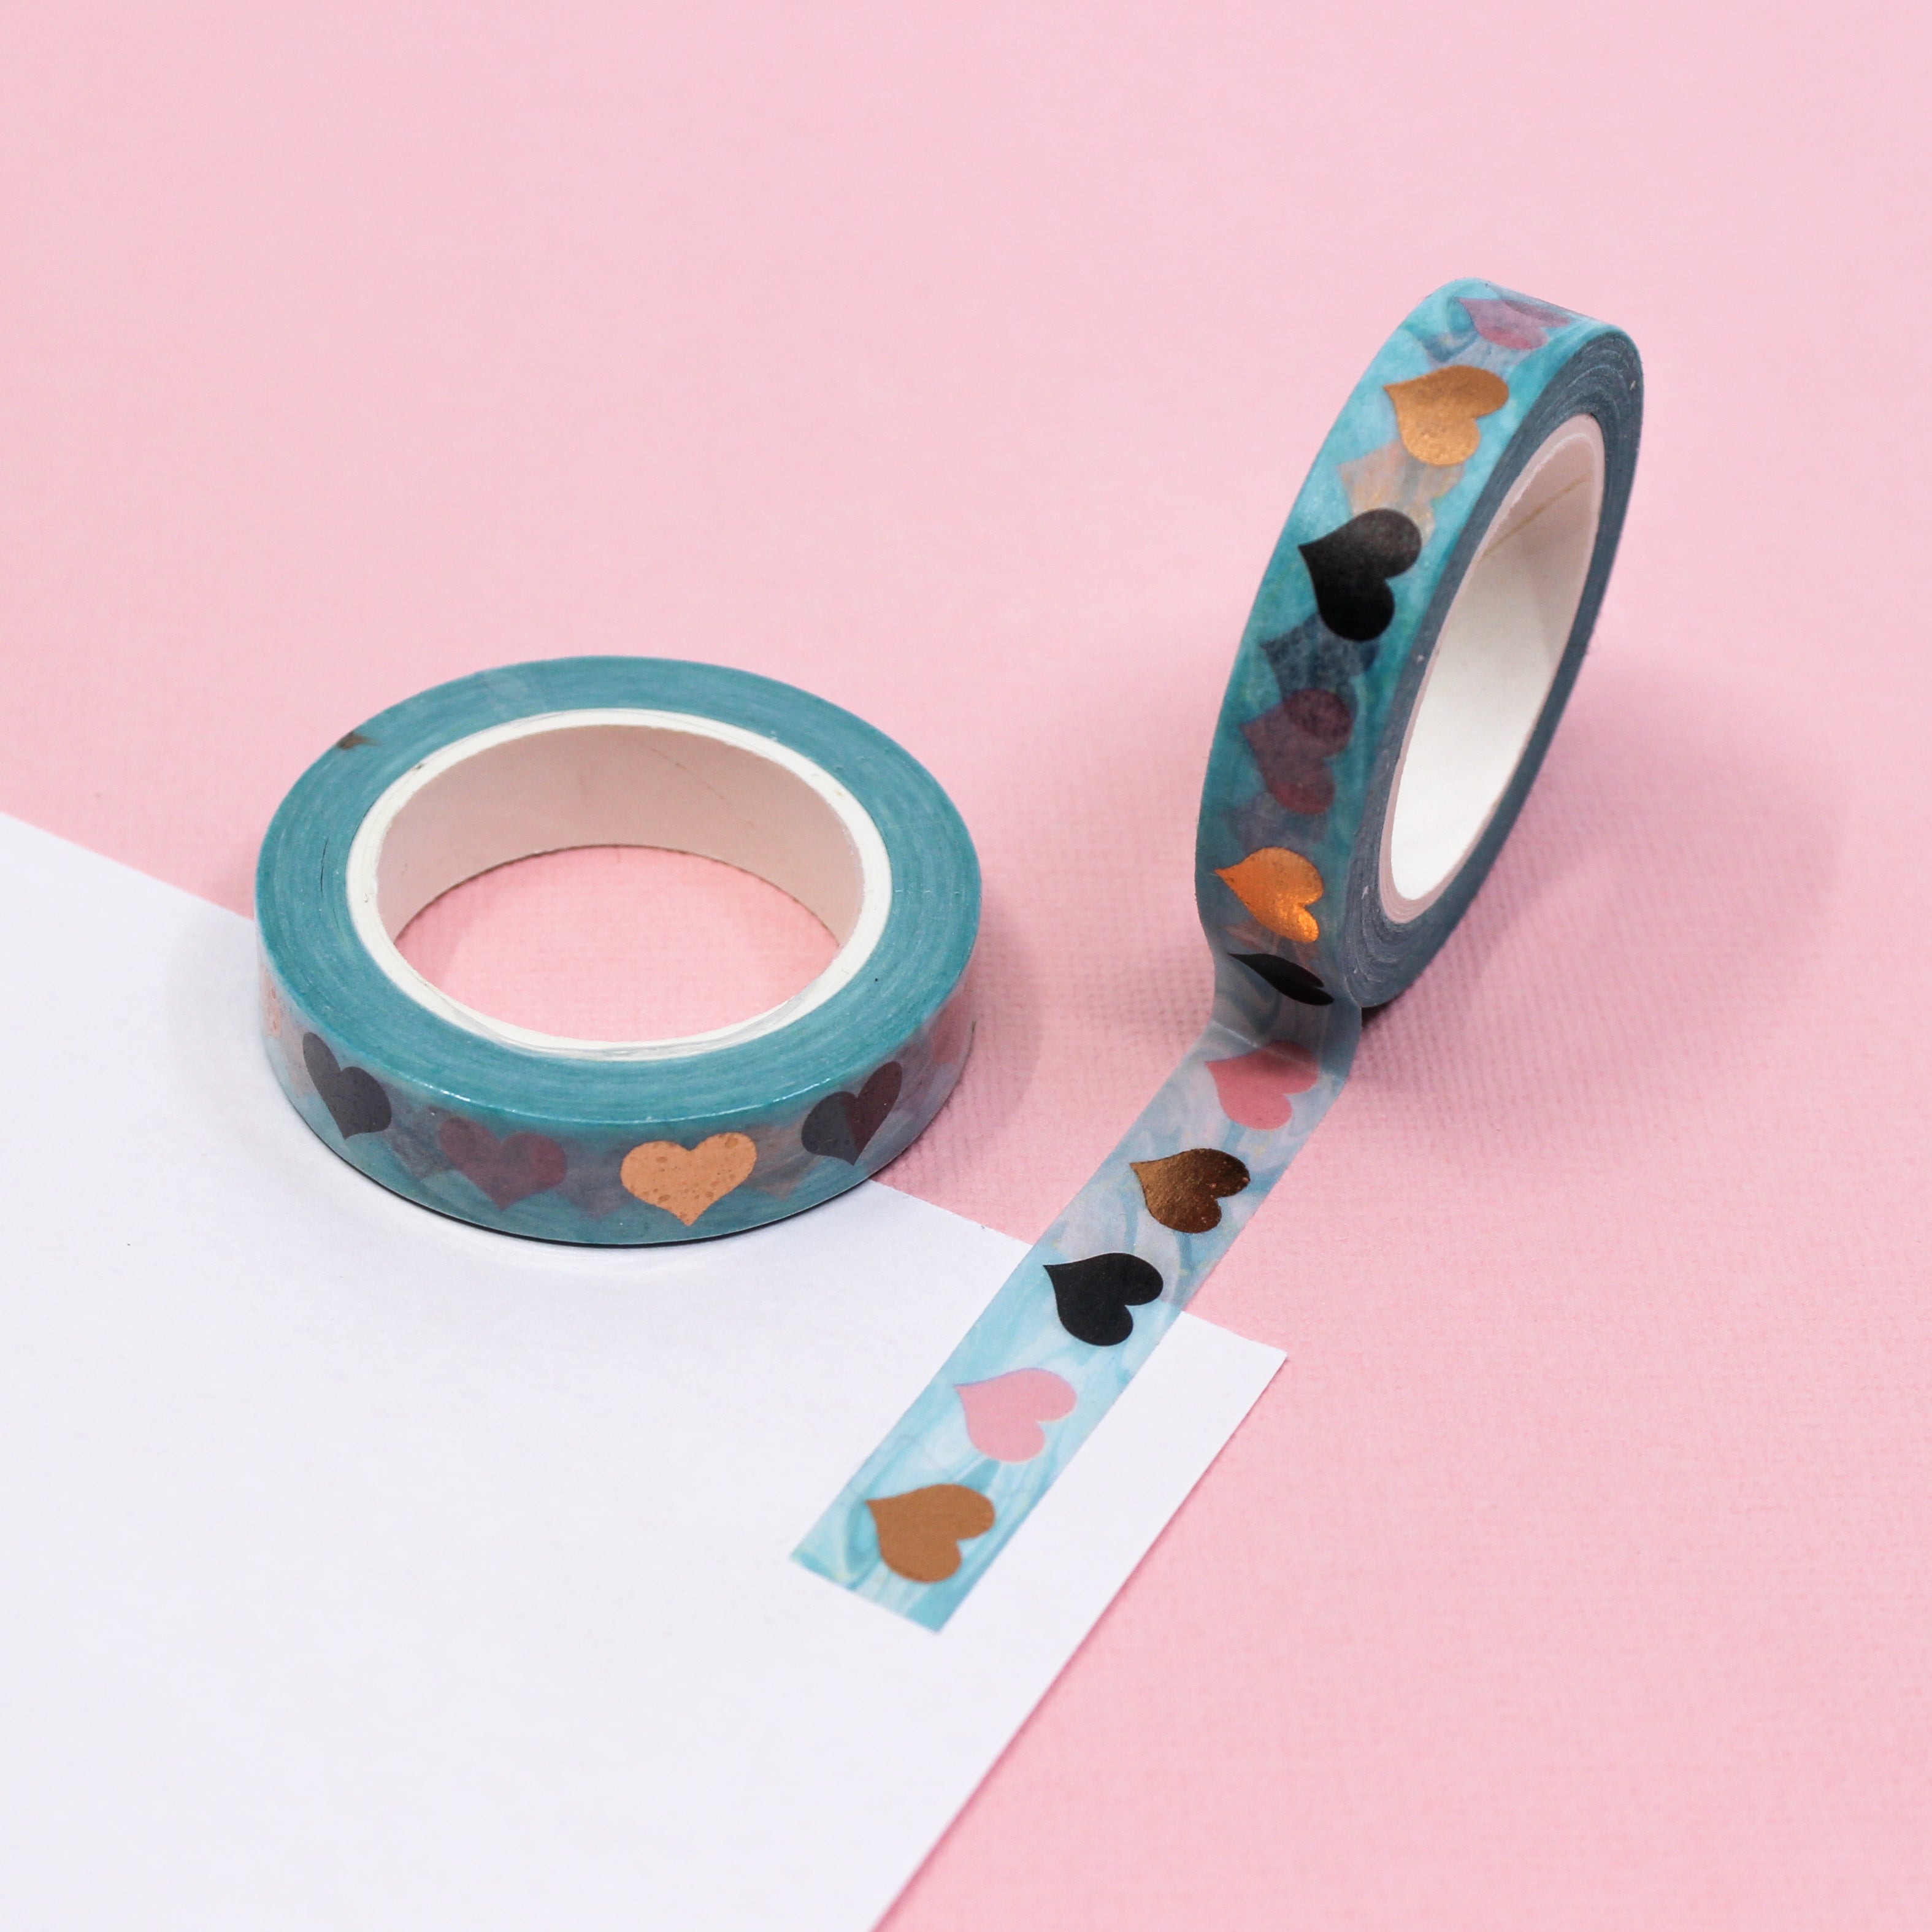 This playful and graphic foil tape featuring colorful hearts is a unique color choice but perfect for your valentine washi collection. This tape is sold at BBB Supplies craft shop.